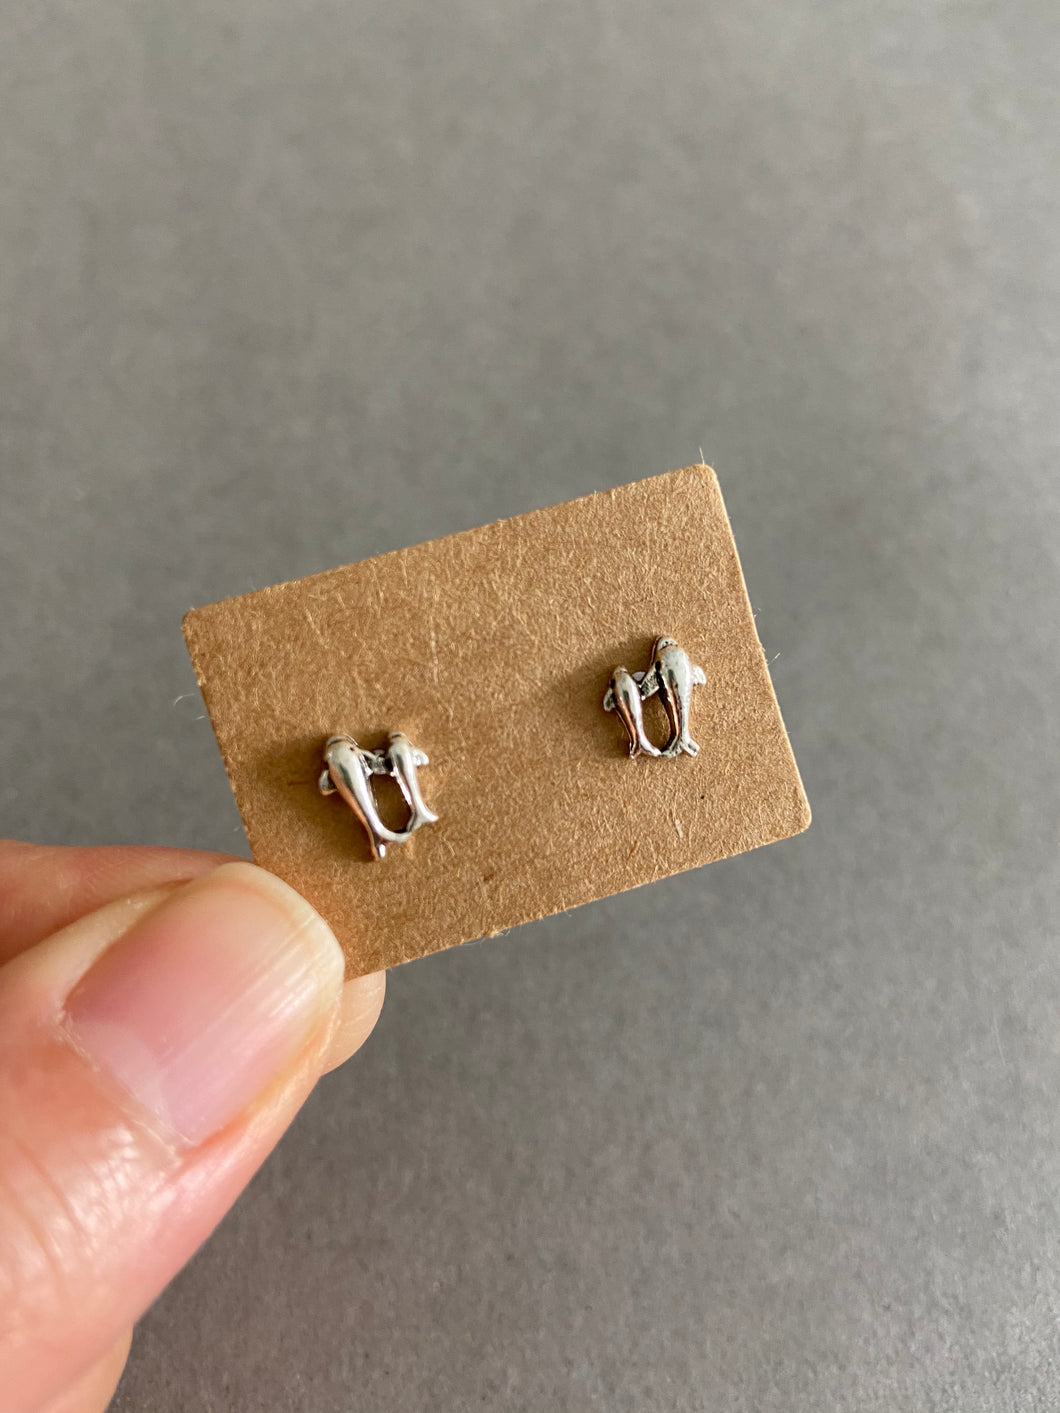 Sterling Silver 2 Dolphins Studs [ESV1064]